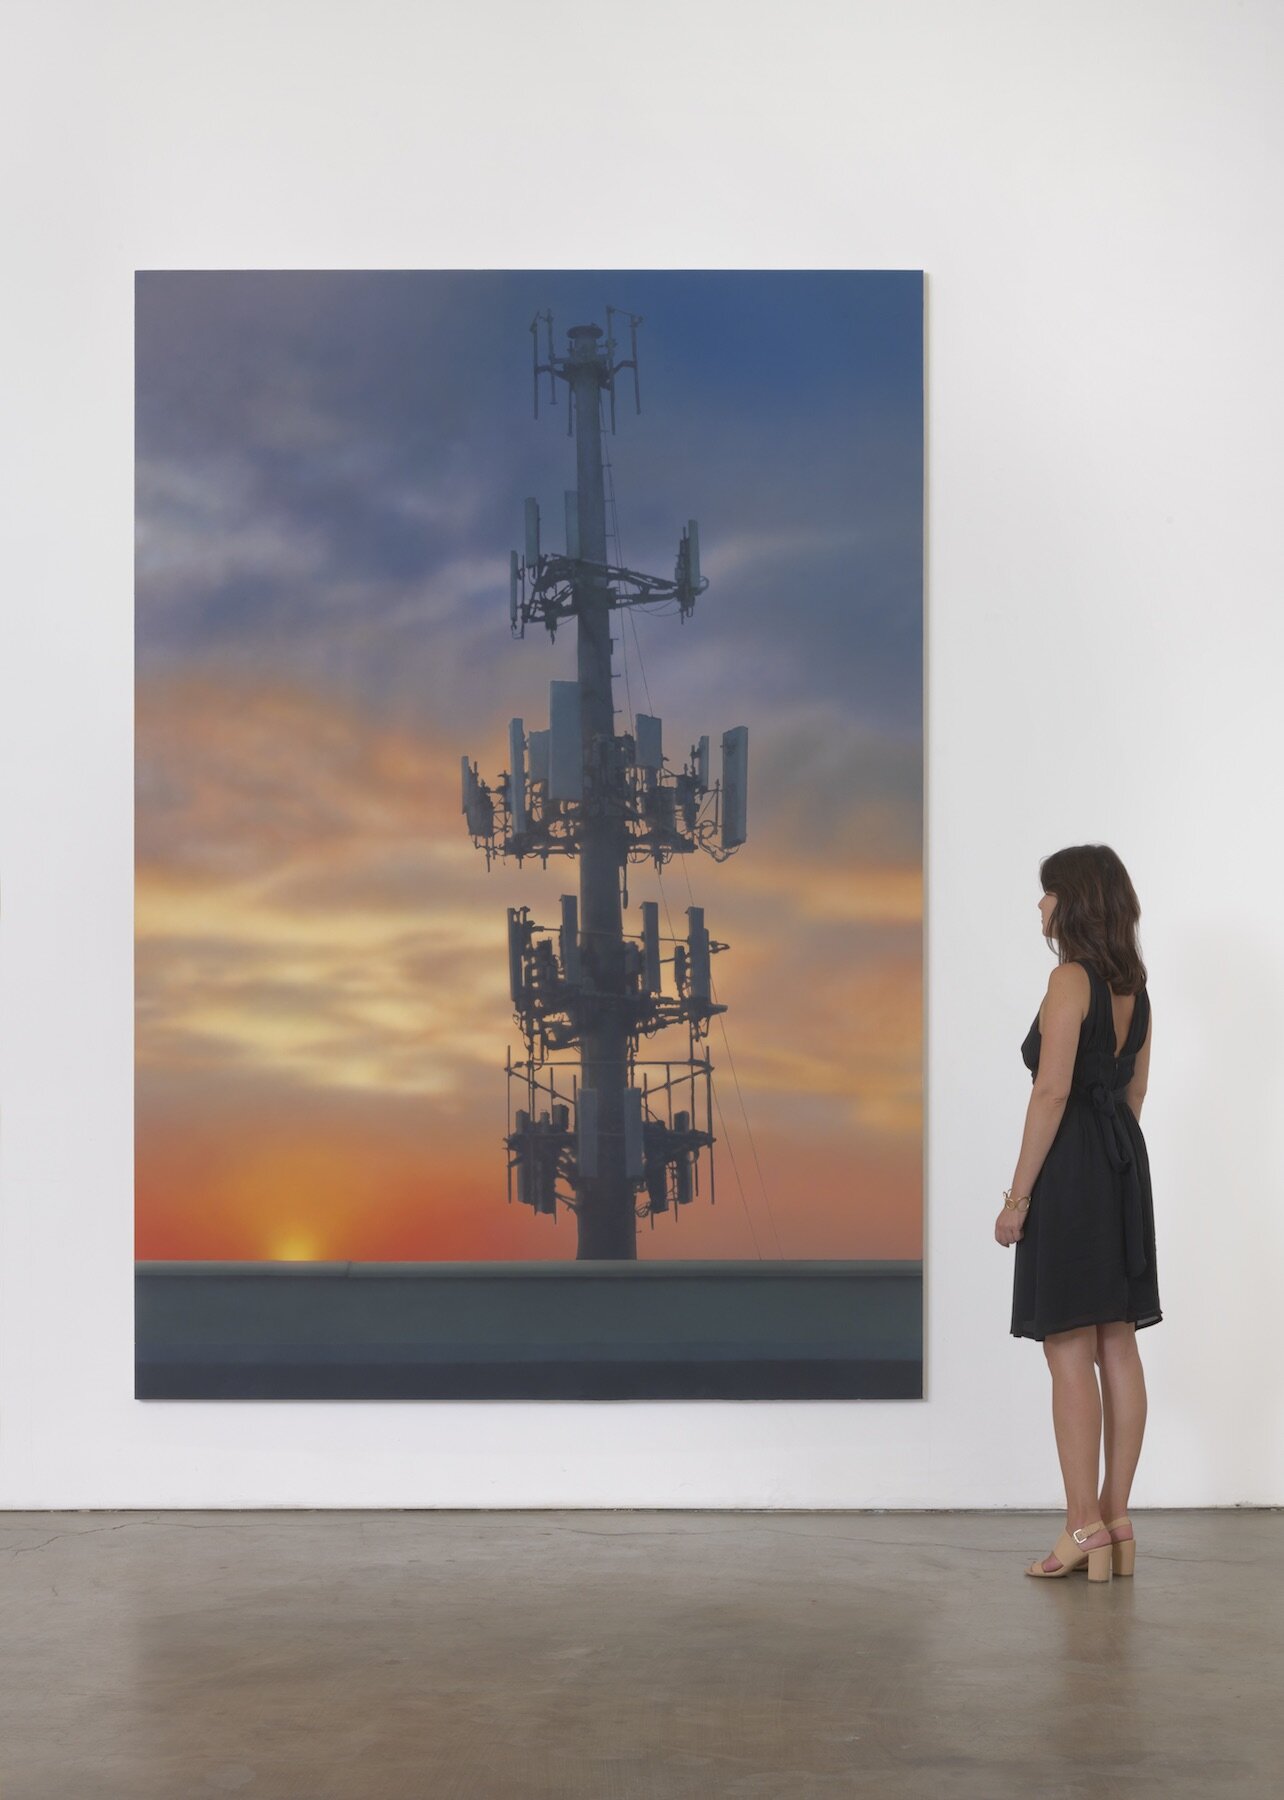   Tower , 2019. Acrylic on canvas. 120 x 84 inches 